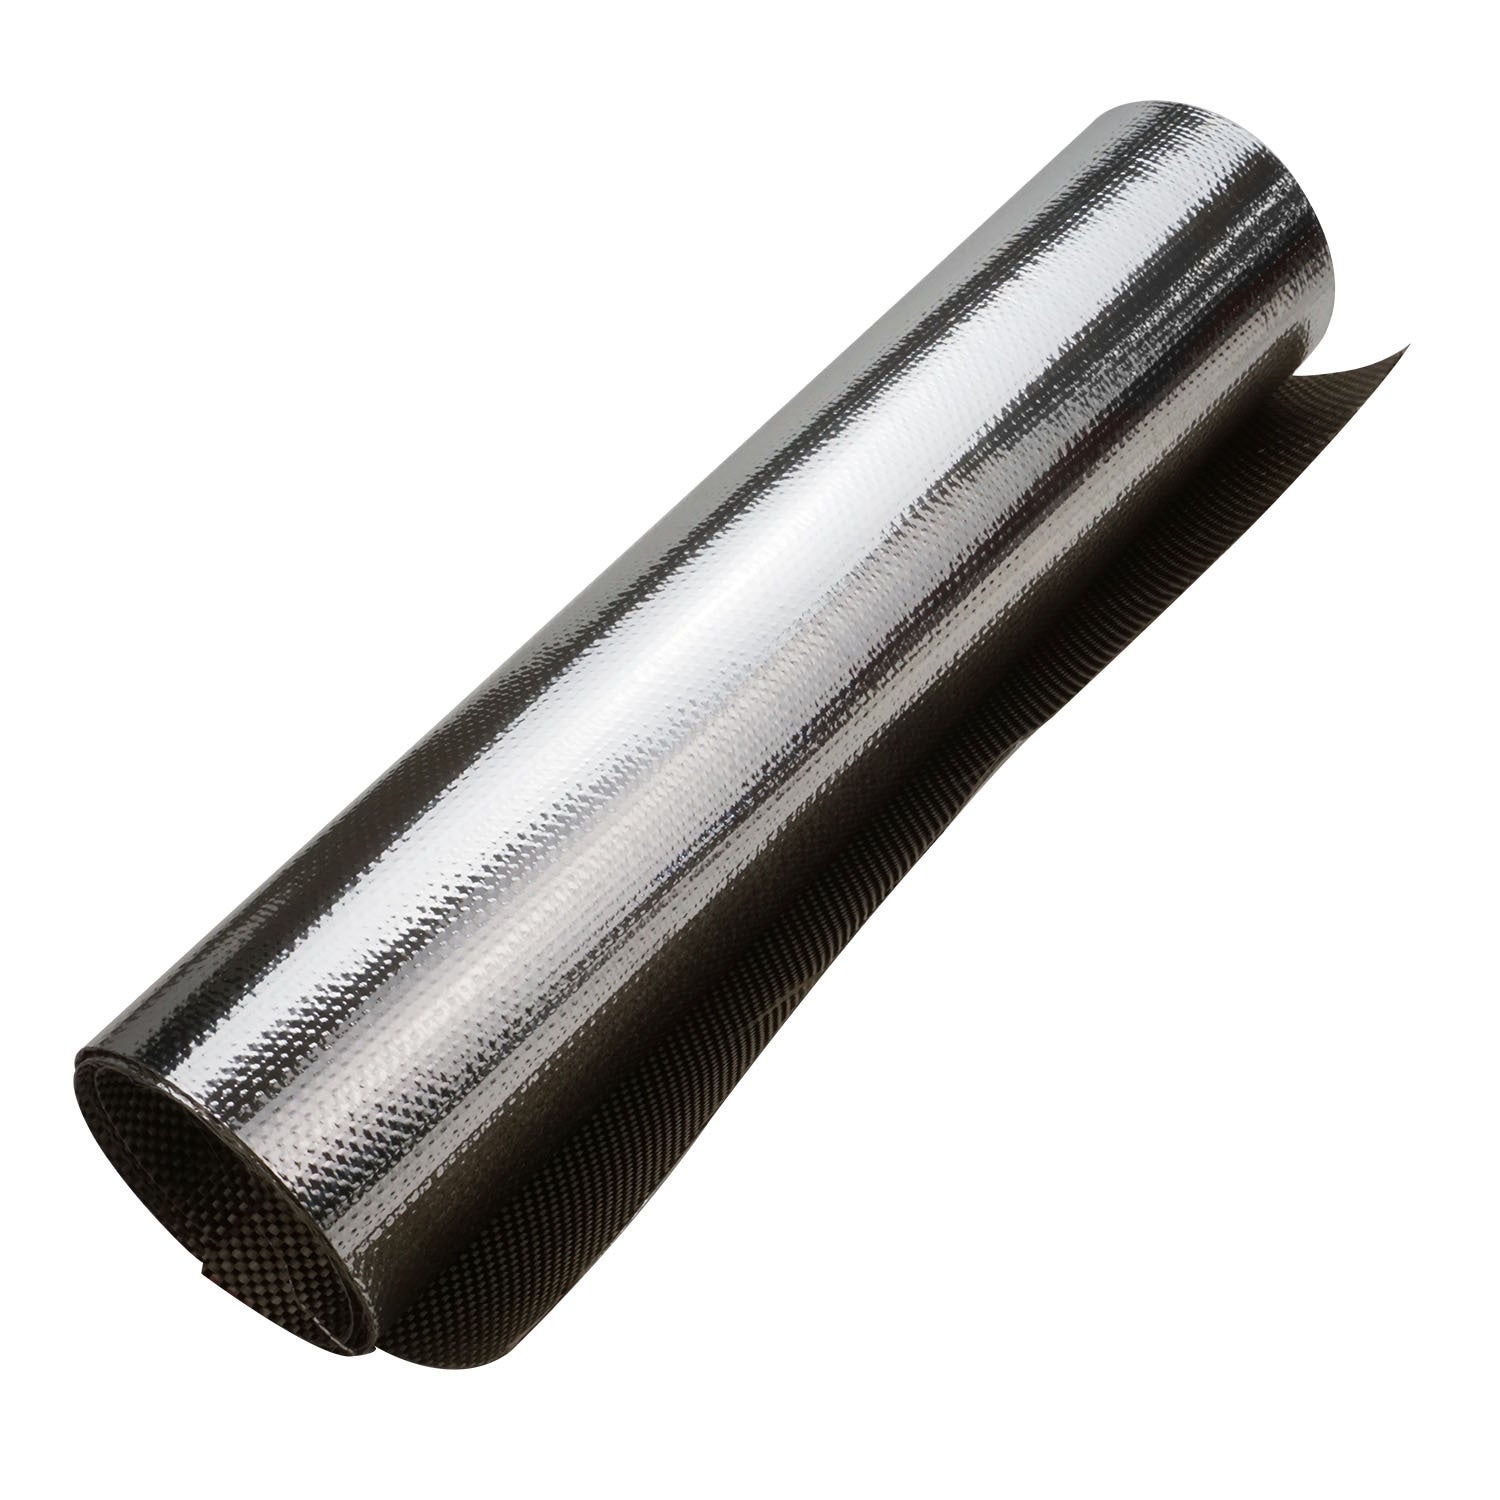 Proflow Heat Barrier Aluminized Lava 1090 Degrees Celsius 12 in Ã— 24 in 0.6mm Thick Mat